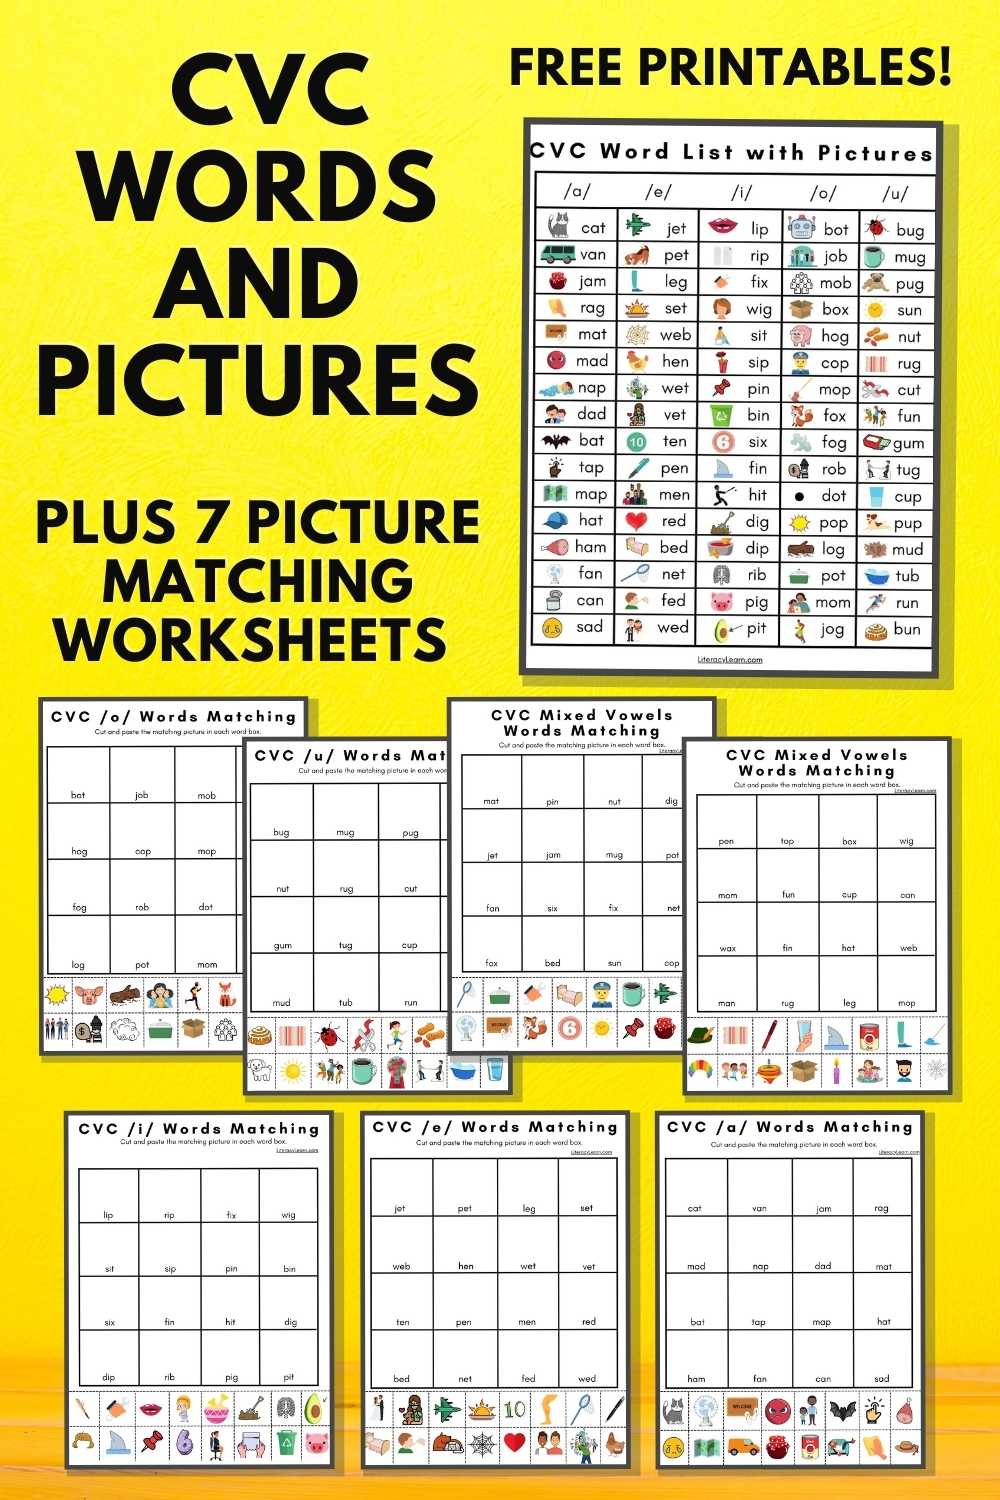 Graphic for Pinterest with 8 pages and the text, "CVC Words and Pictures, plus 7 picture matching worksheets. Free Printables!"